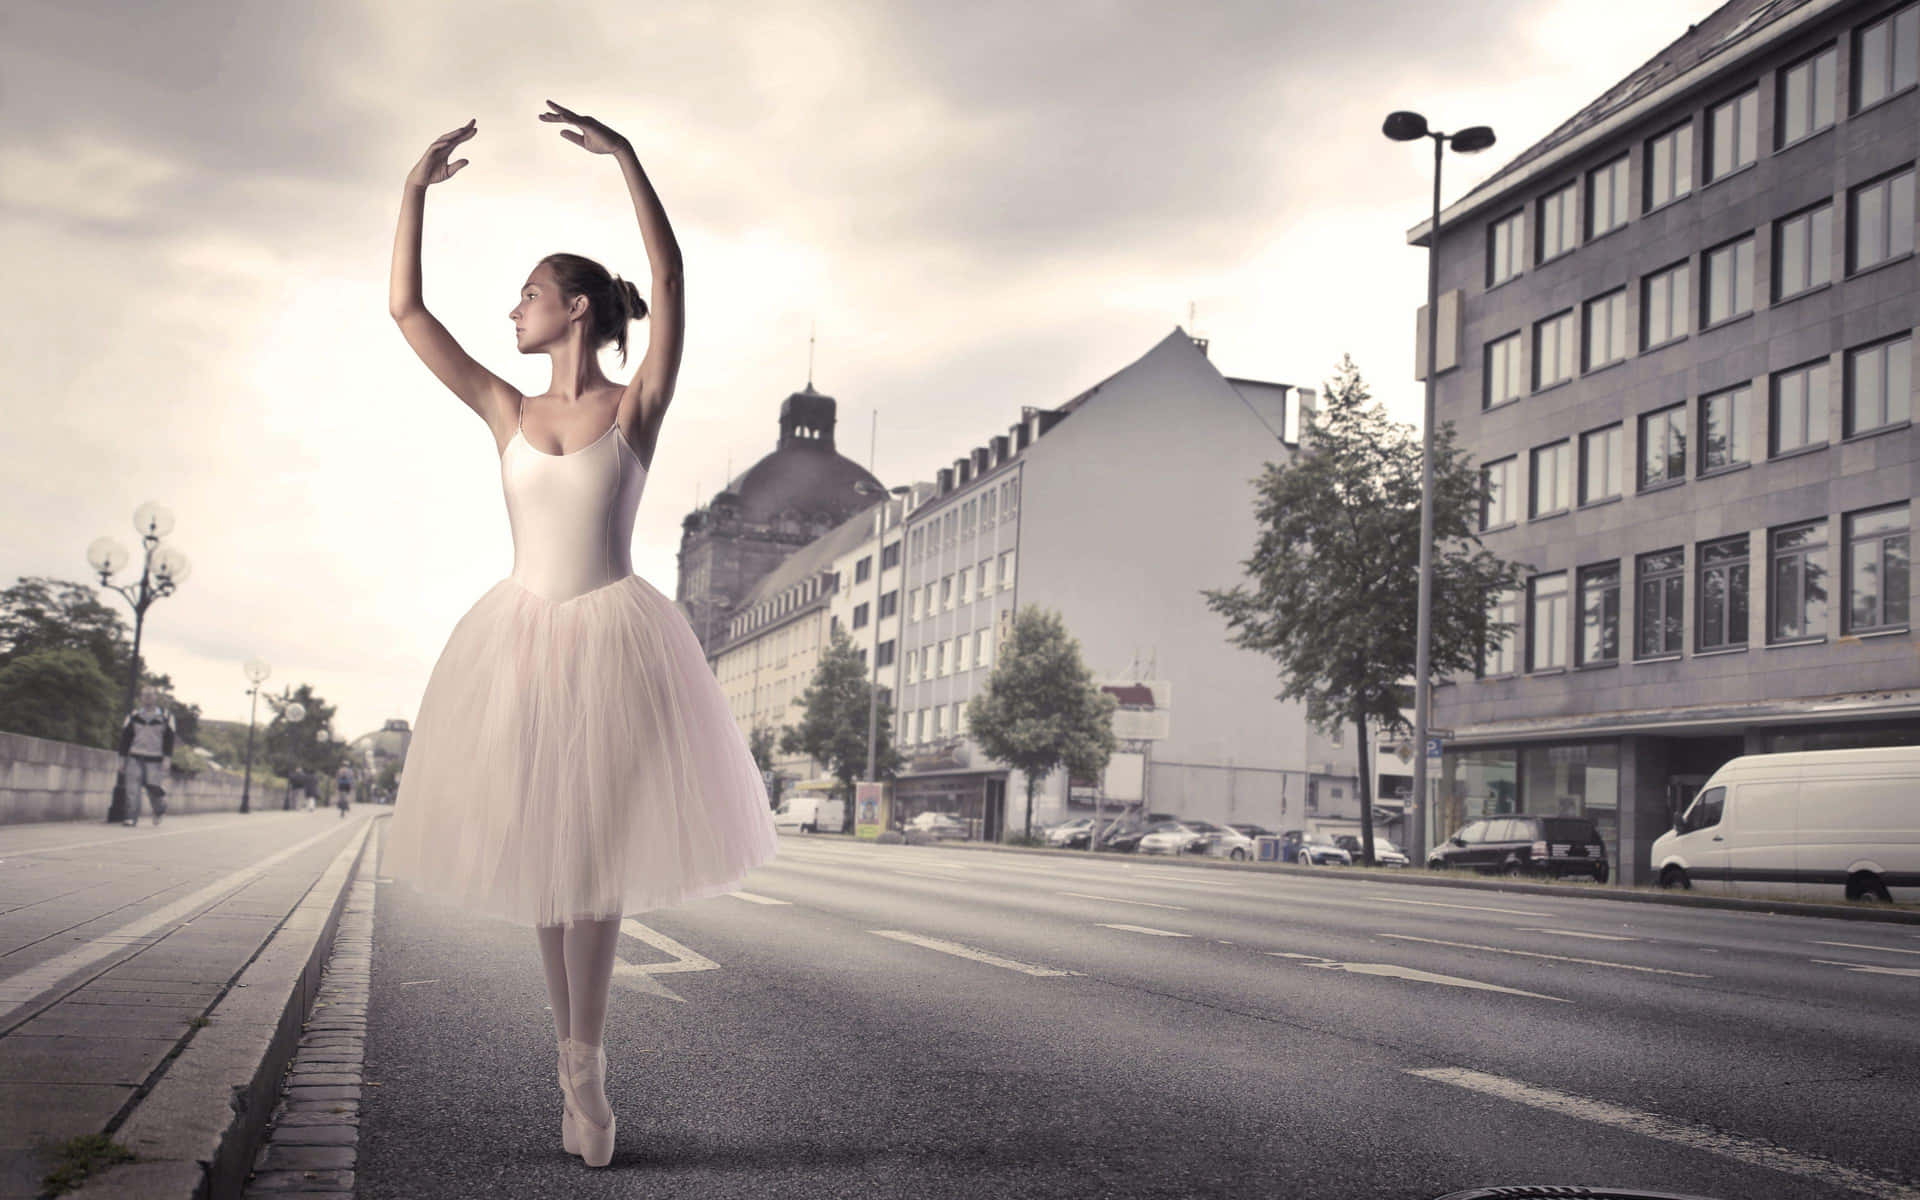 A Ballerina Is Dancing On The Street